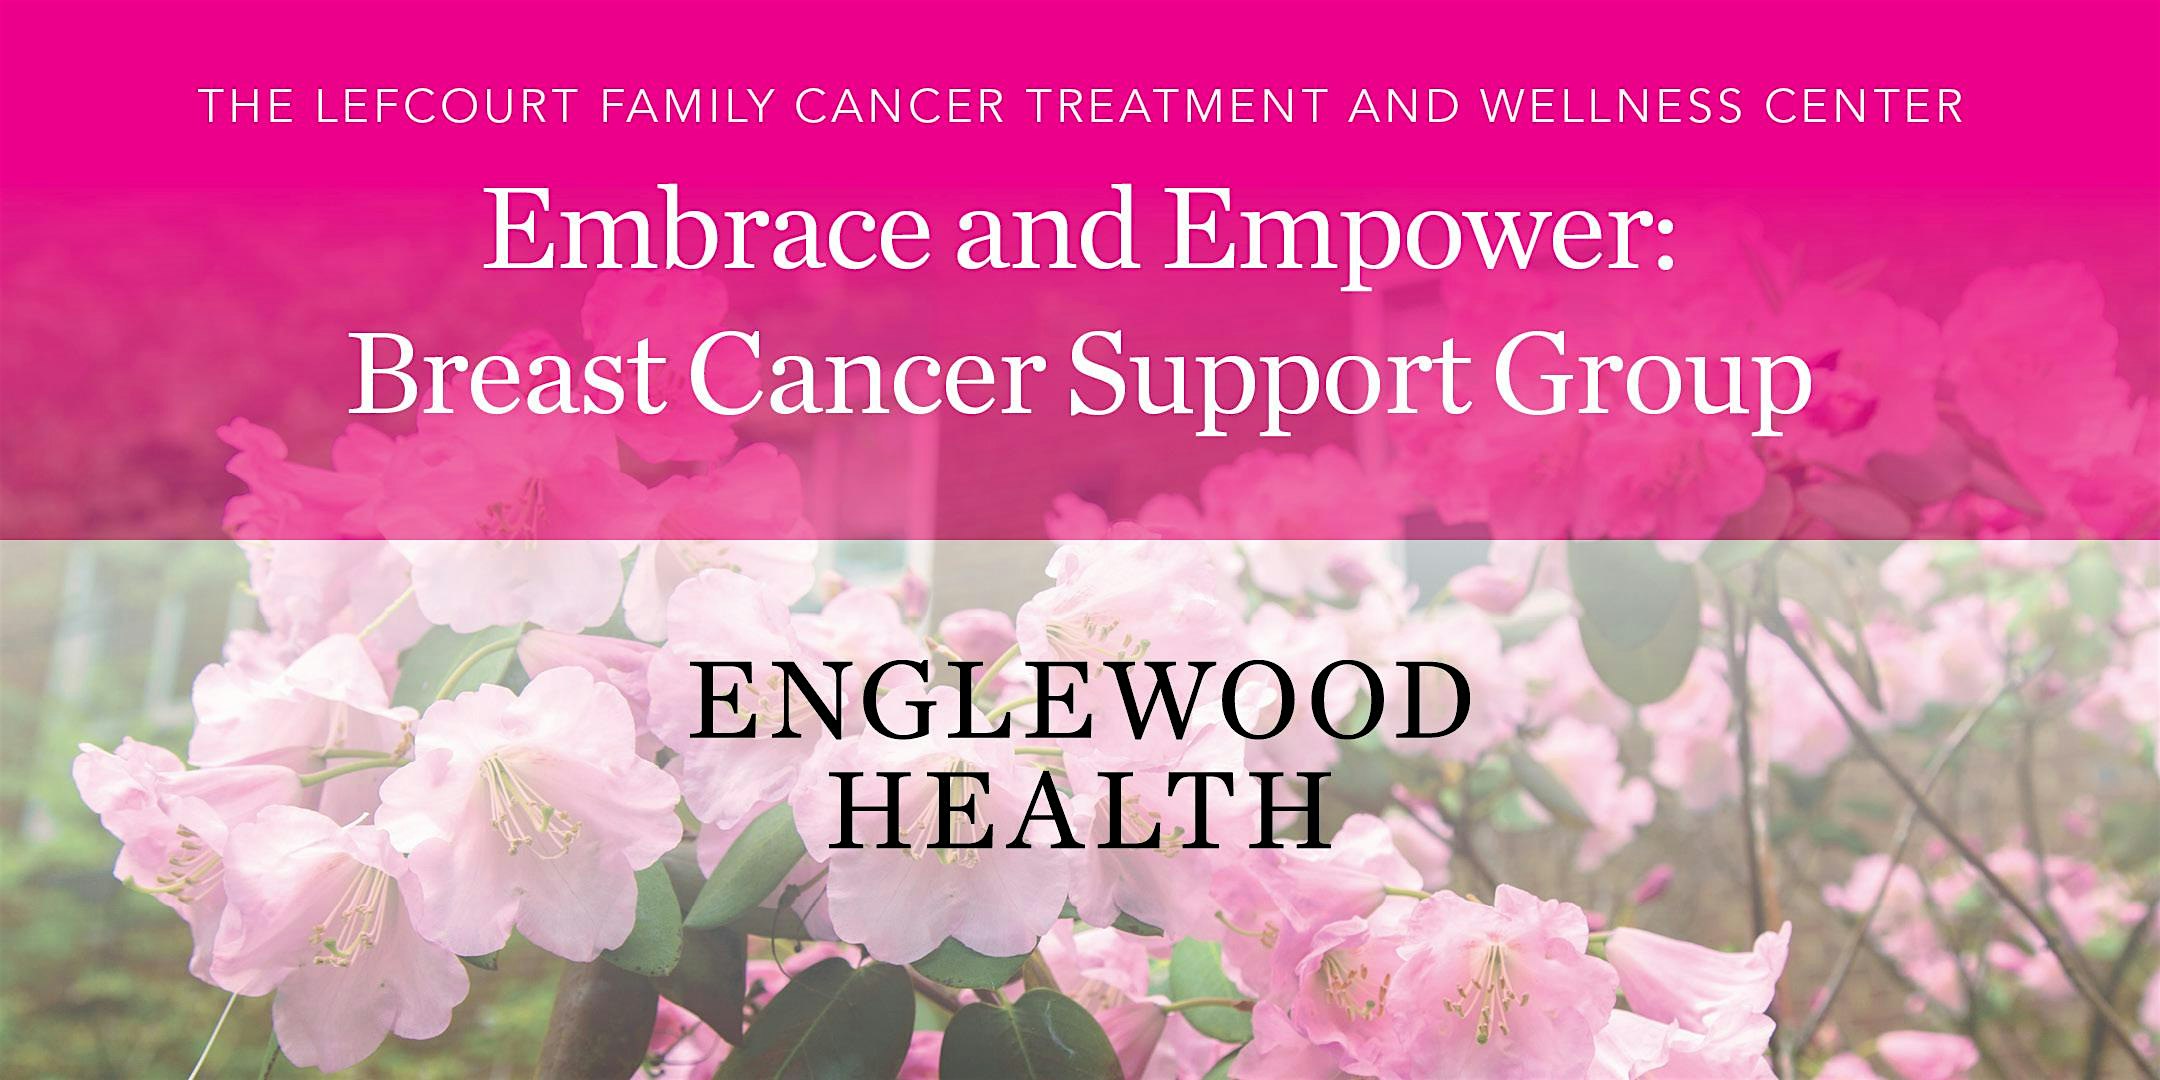 More info: Embrace and Empower: Breast Cancer Support Group